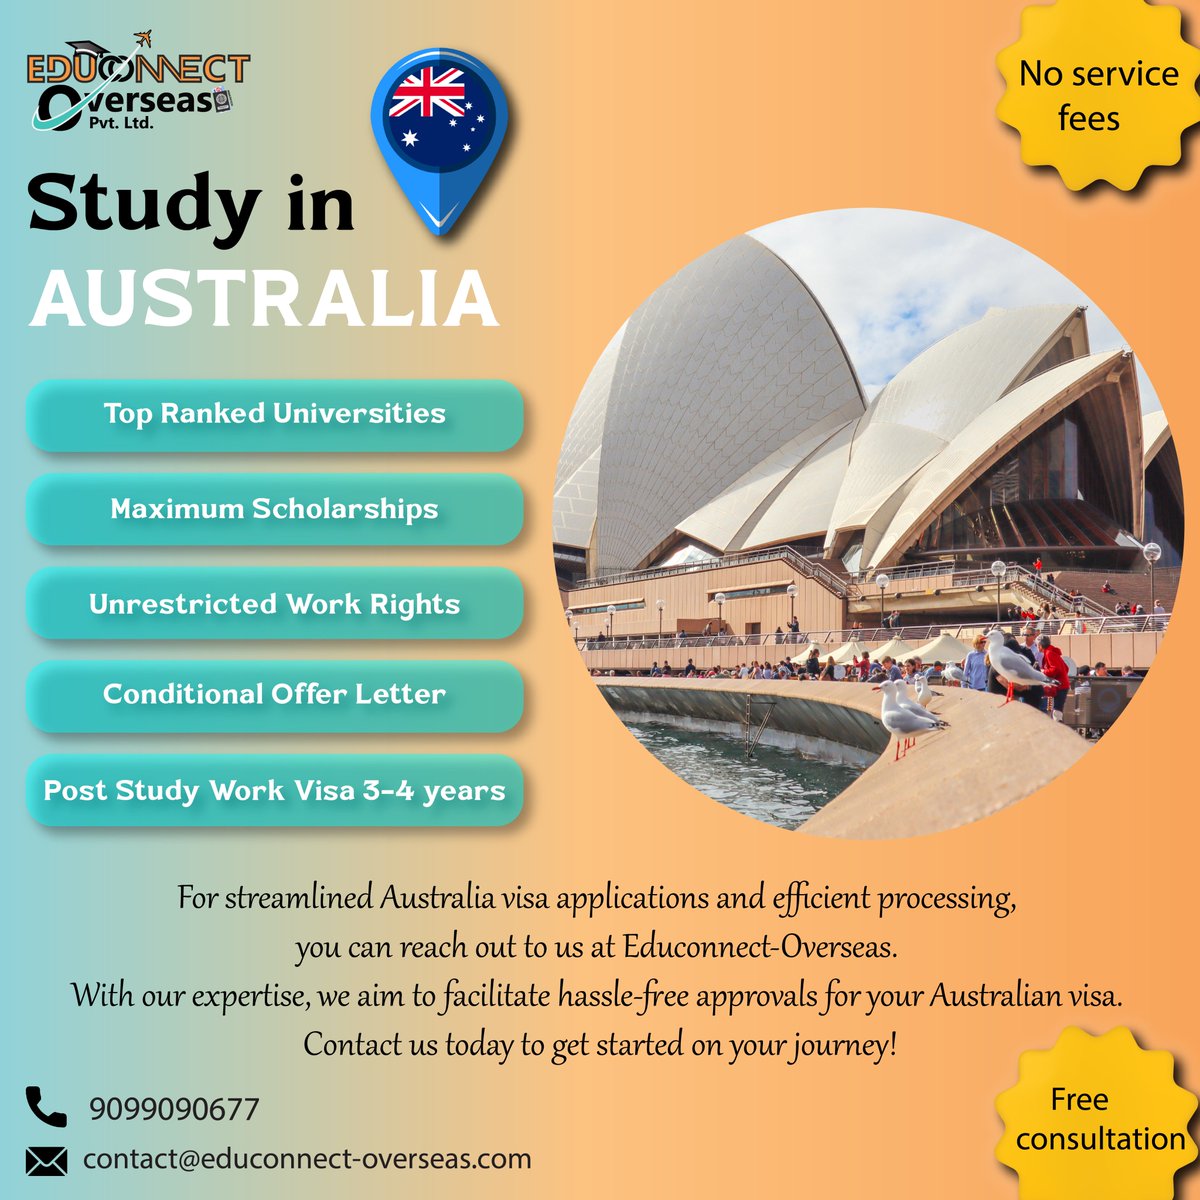 Get in touch with us today and let's make your Australian visa journey smooth and seamless
#explorepage #australia #canada #Immigration #VisaConsultants #StudyAbroad #WorkVisa #VisaExpert #MigrationServices #educconnect_overseas #GlobalVisa #VisaProcessing #StudentVisa #ahmedabad